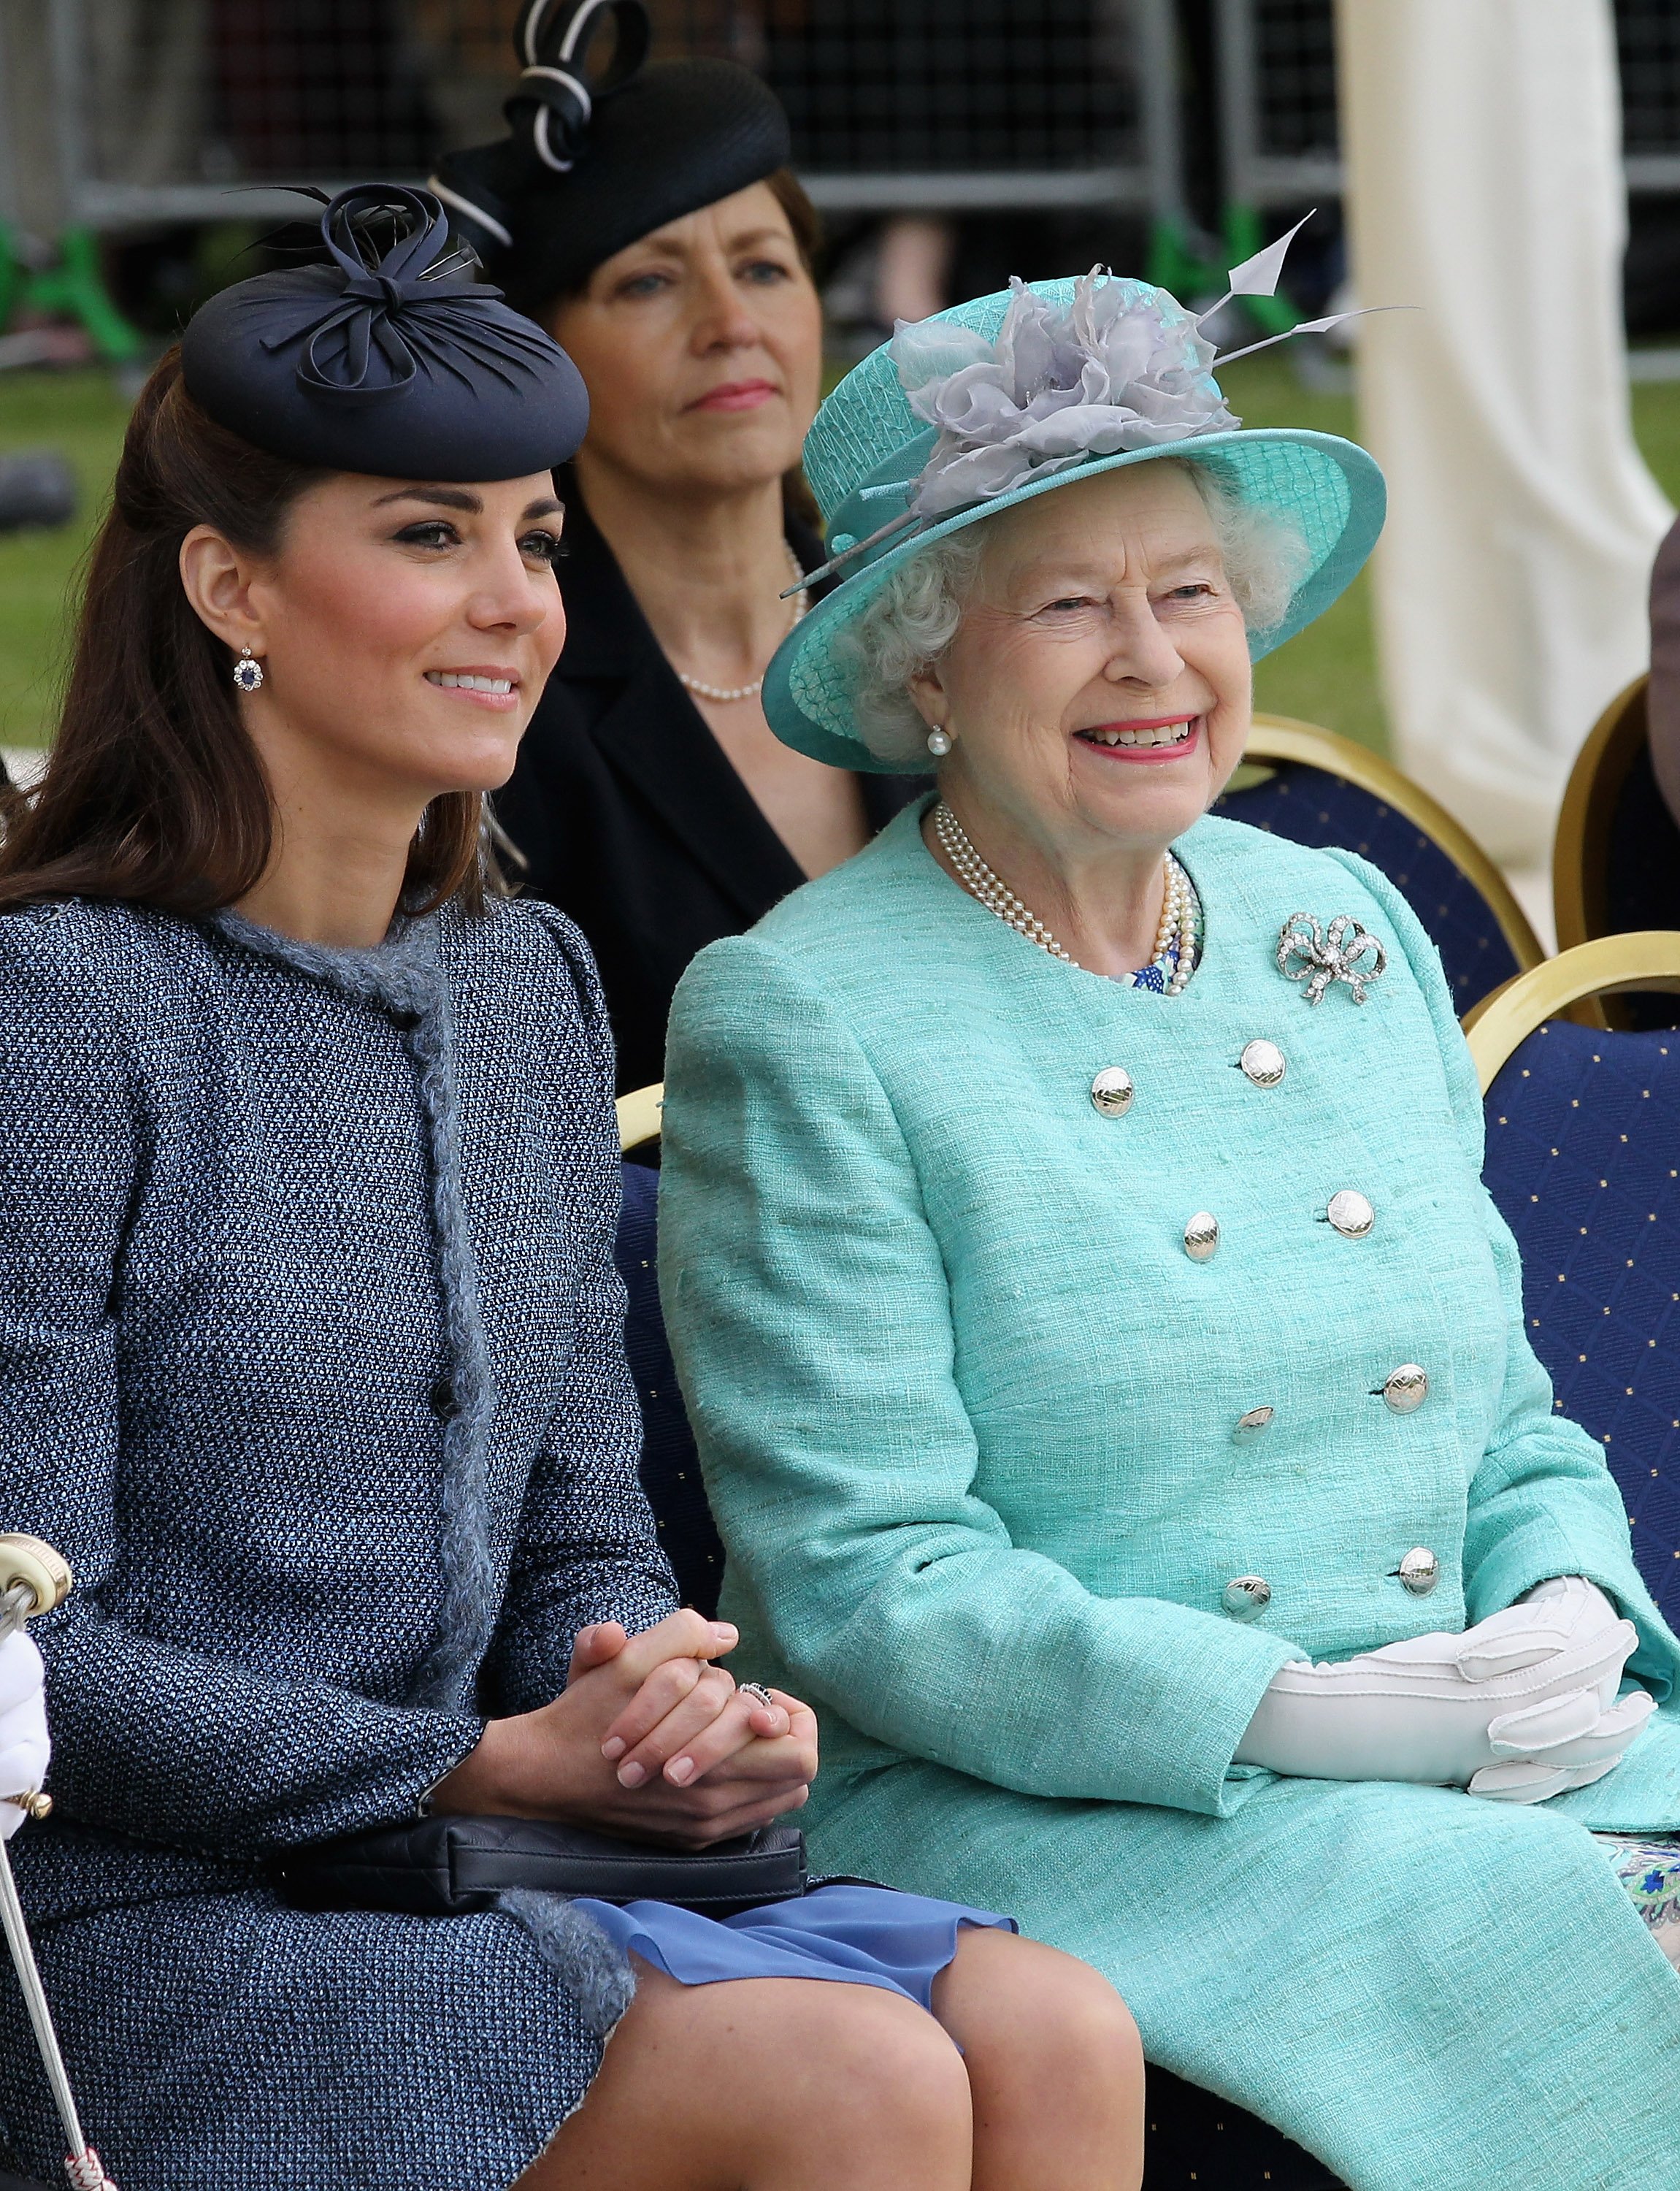 Catherine, Duchess of Cambridge and Queen Elizabeth II smile as they visit Vernon Park during a Diamond Jubilee visit to Nottingham on June 13, 2012 in Nottingham, England |Source: Getty Images